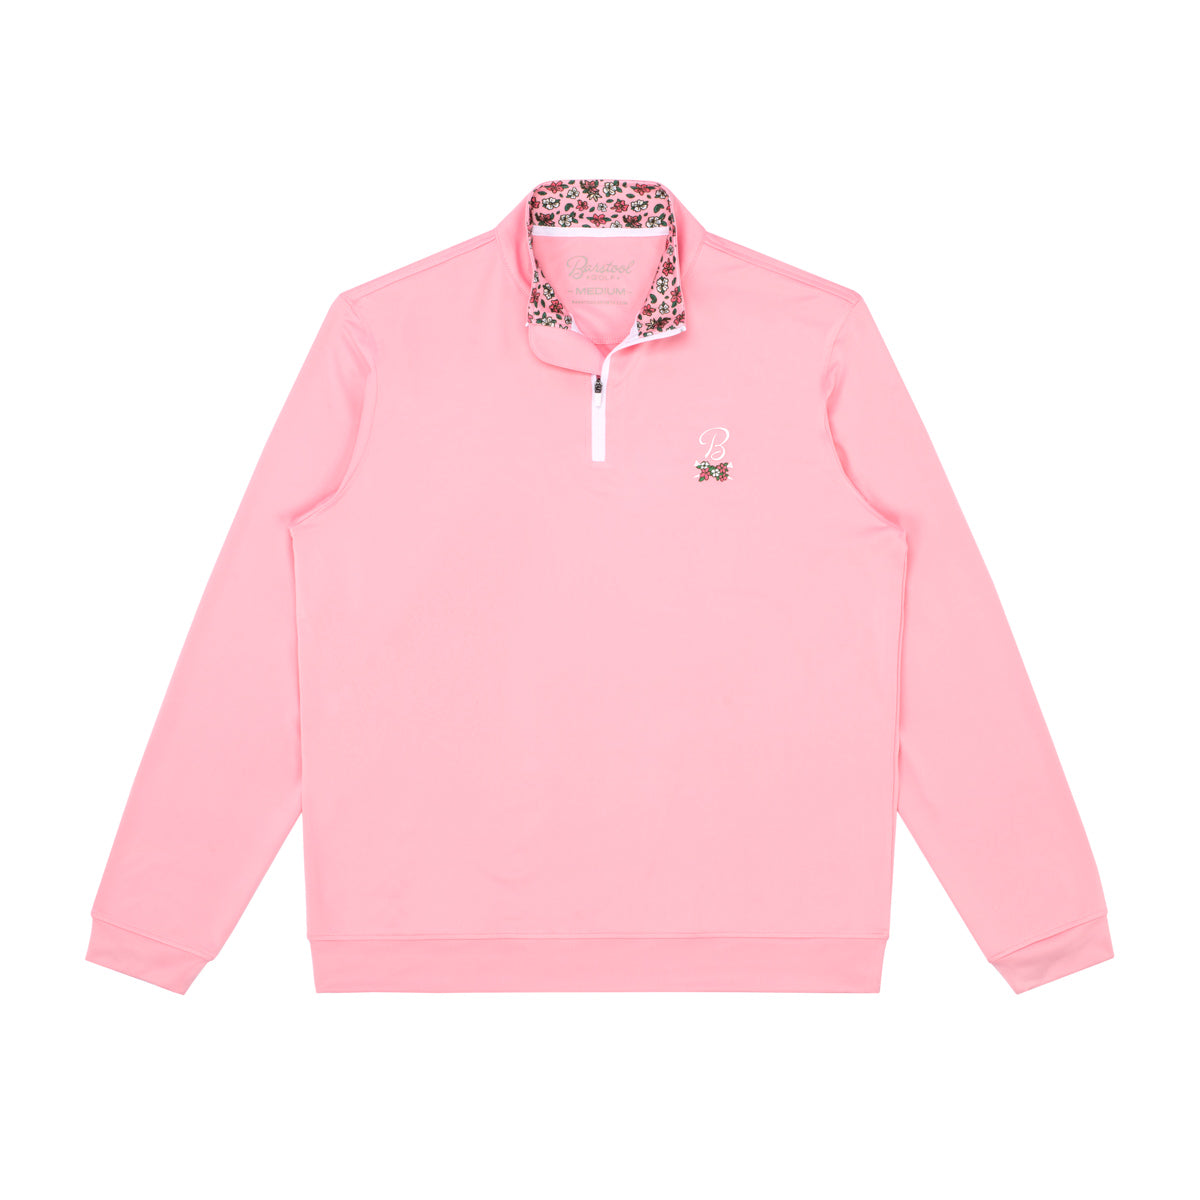 Barstool Golf Crossed Tees Floral Quarter Zip-Pullovers-Fore Play-Pink-S-Barstool Sports